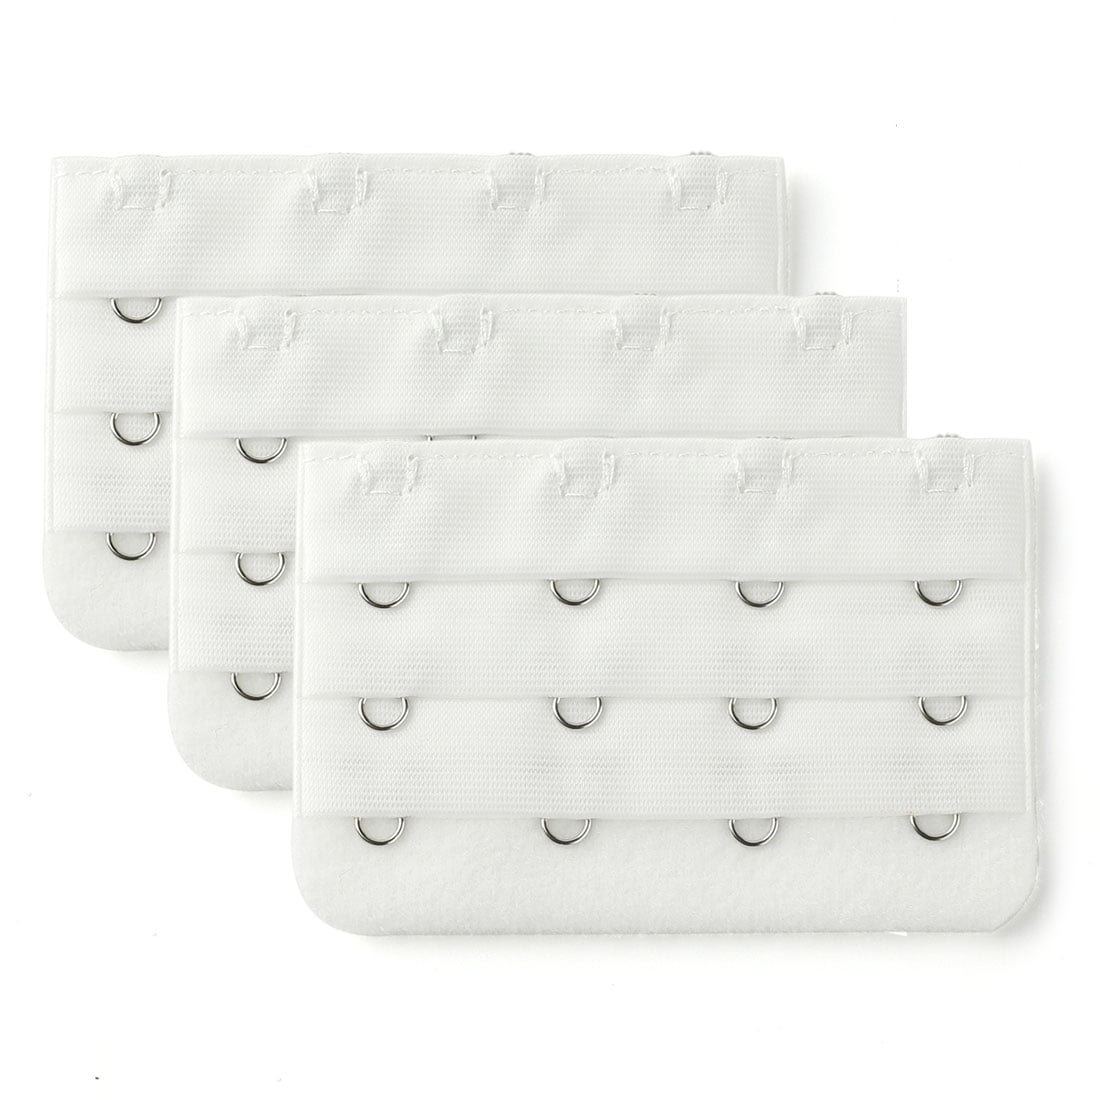 White Bra Making Replacement Hook and Eye Tape Closures - 2 Rows - 1 1/2  Wide - Lingerie Design, DIY Bra Supplies (HE132W)